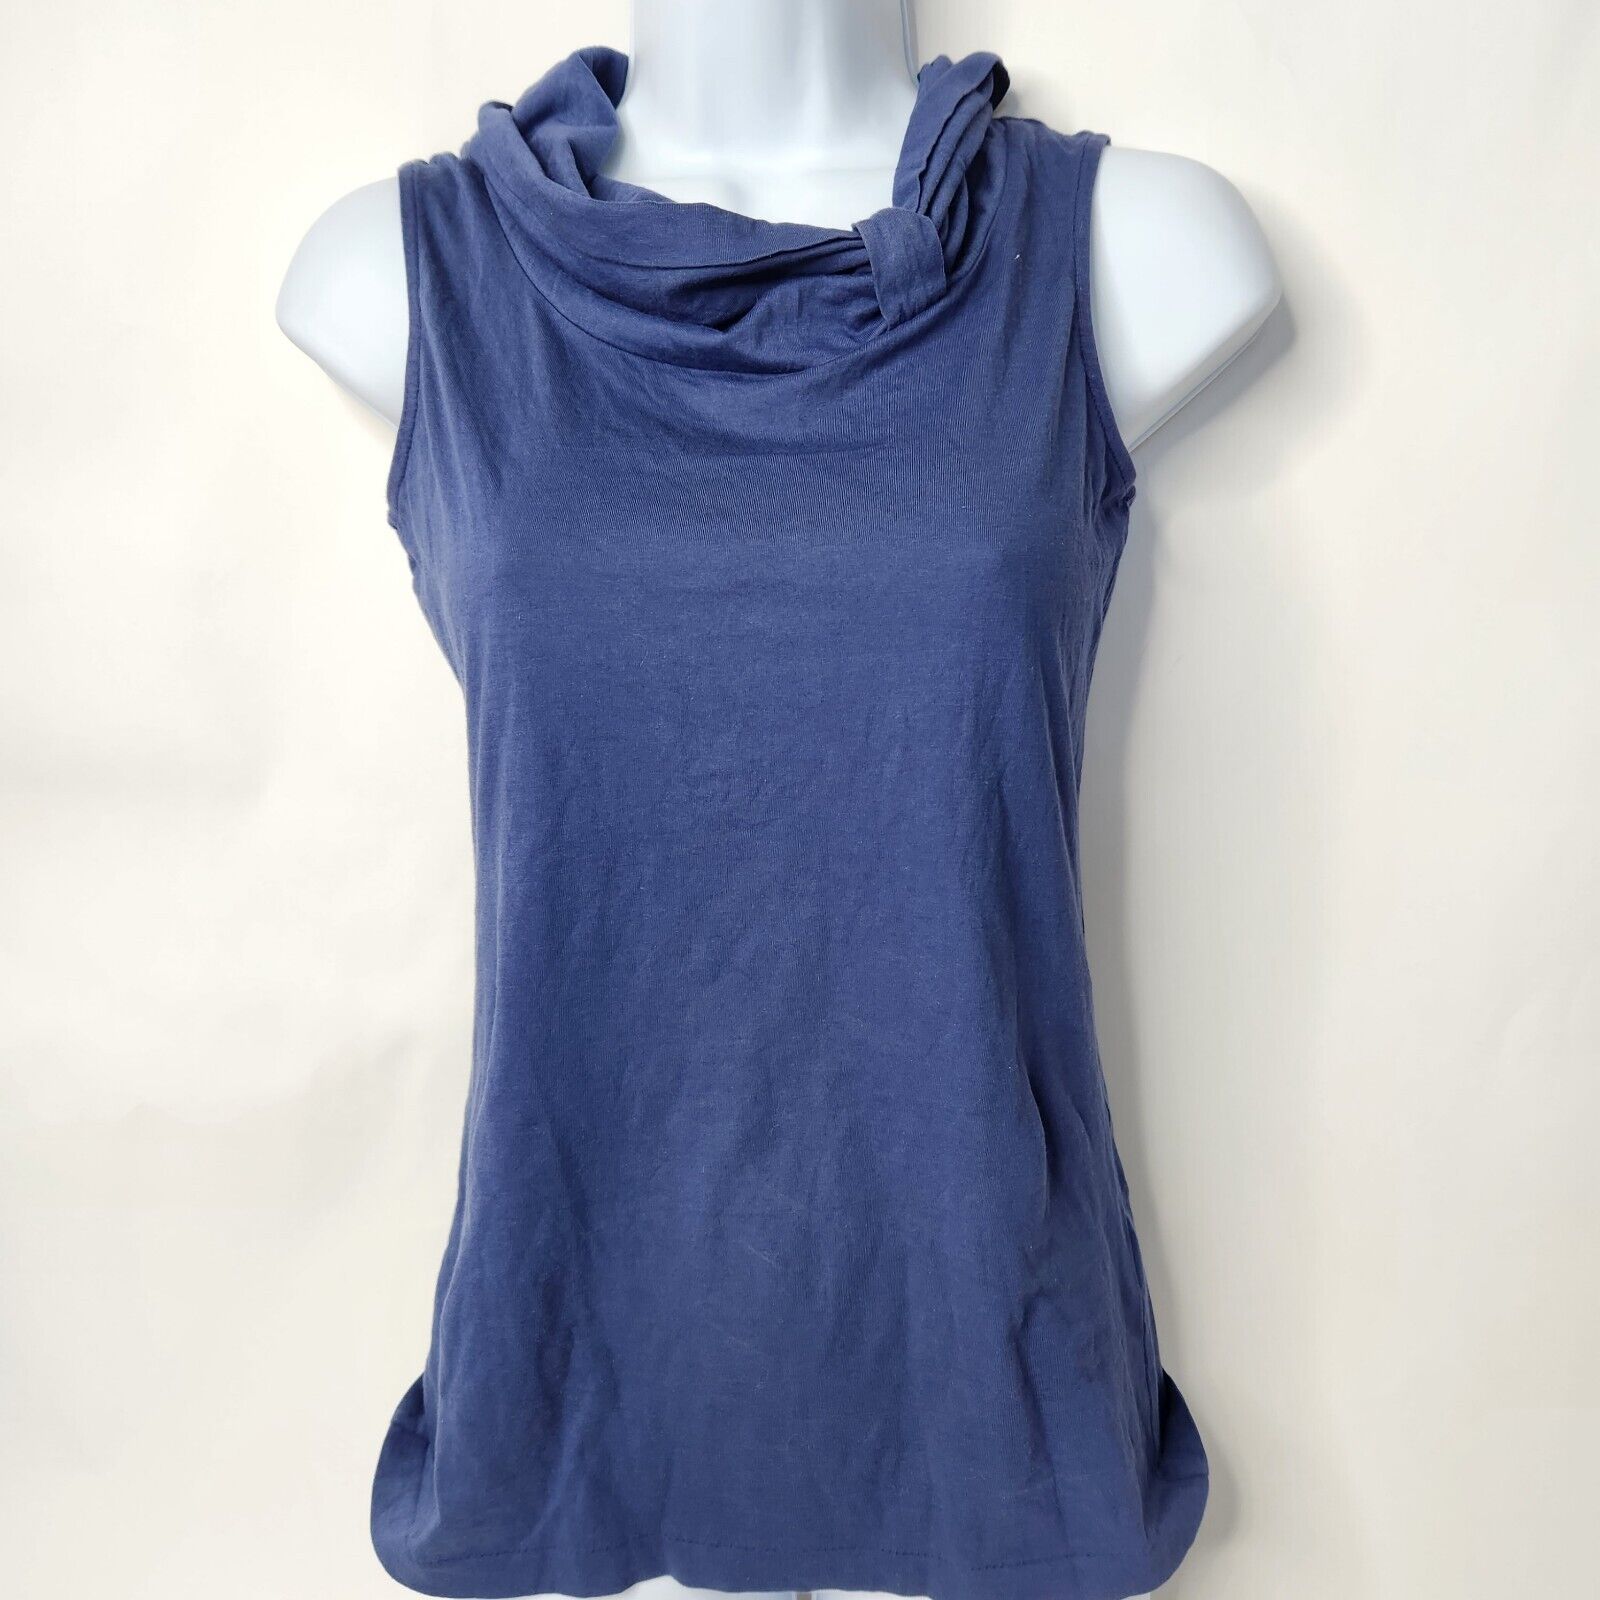 Lilly Pulitzer Women's Size XS Sleeveless Top Navy - image 1